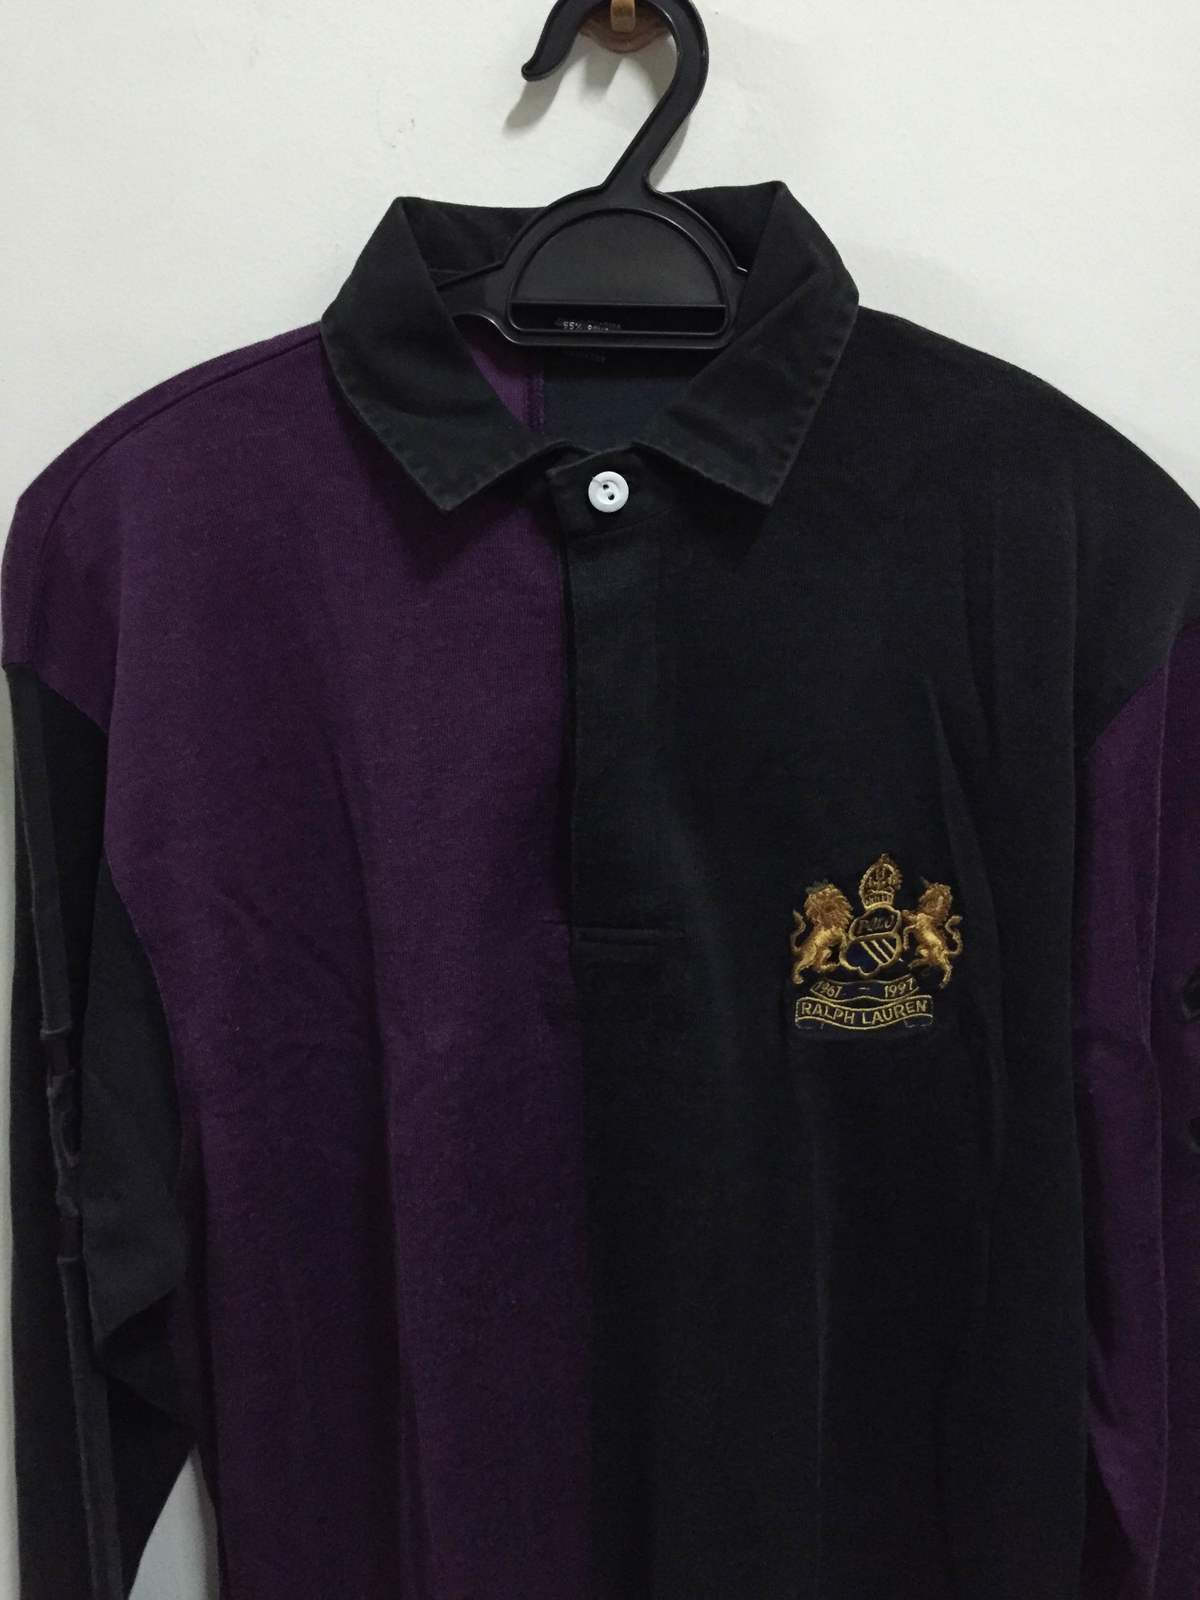 Rare Vintage POLO RALPH LAUREN Rugby Rayon Long Sleeve shirt - Casual ...